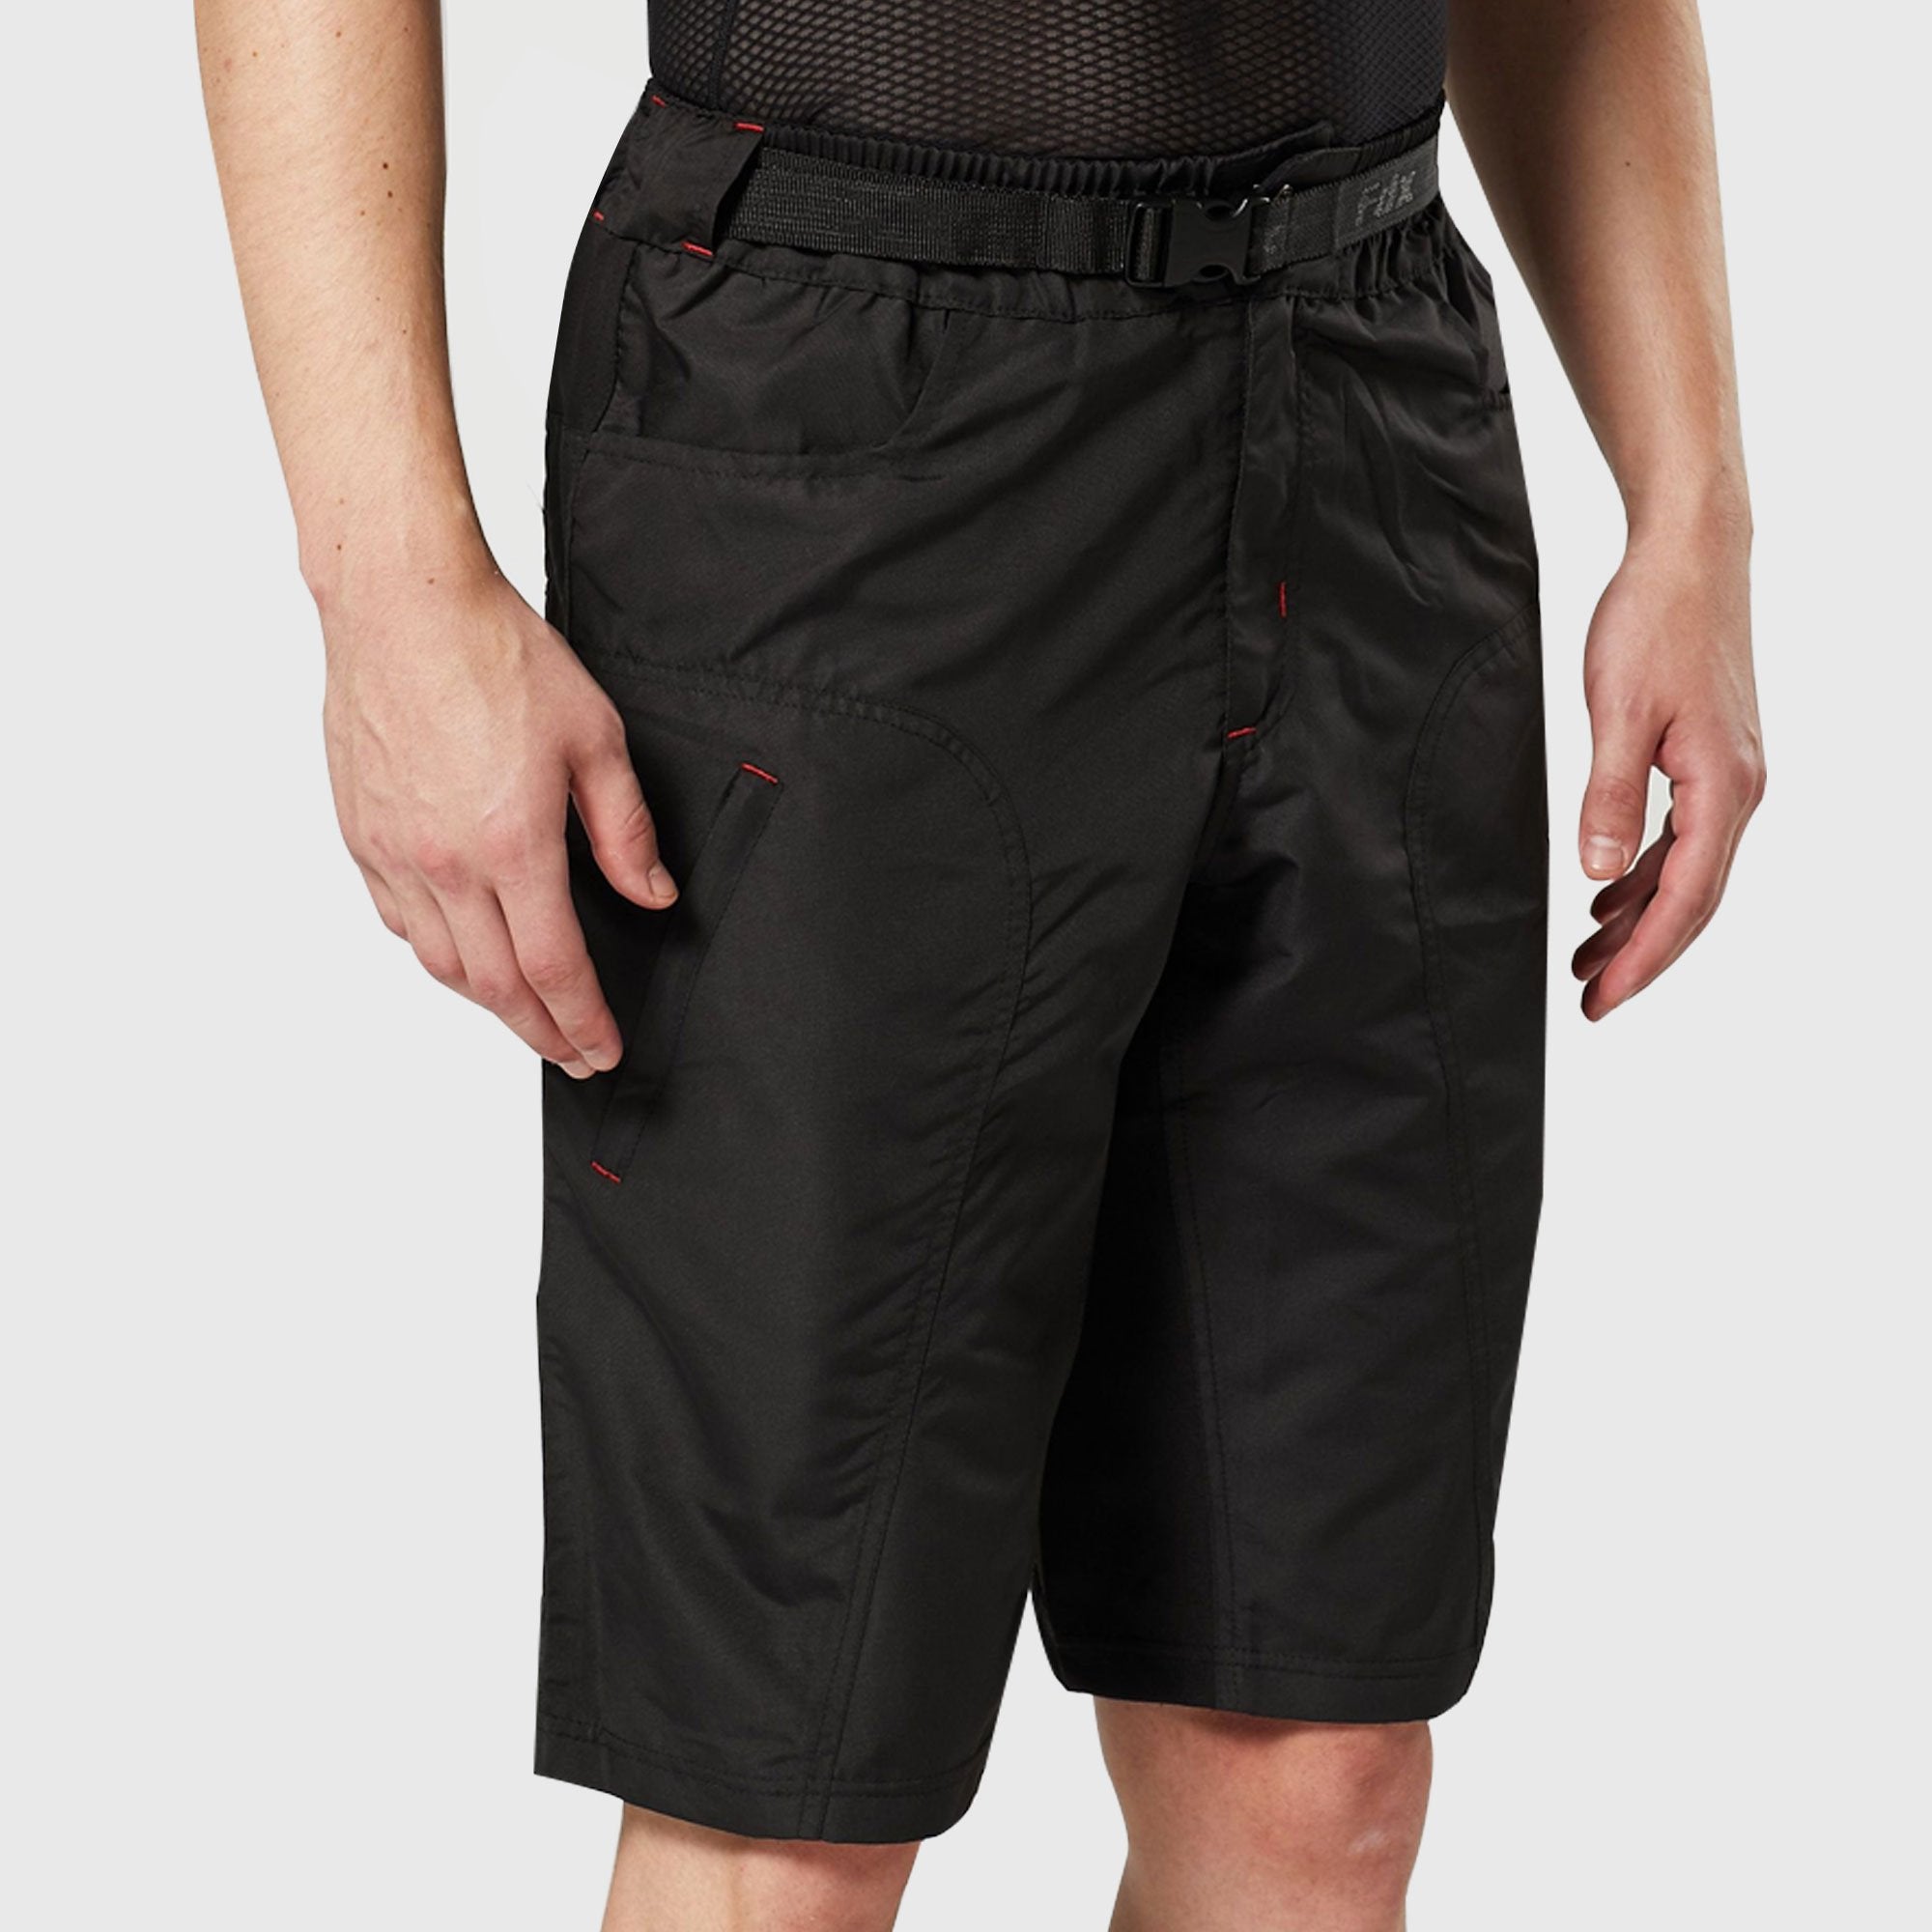 Men’s Black best MTB Shorts, Lightweight Mountain Bike Shorts with Removable Padded Liner, Breathable Quick Dry Outdoor Cycle Pants with Cargo Pockets